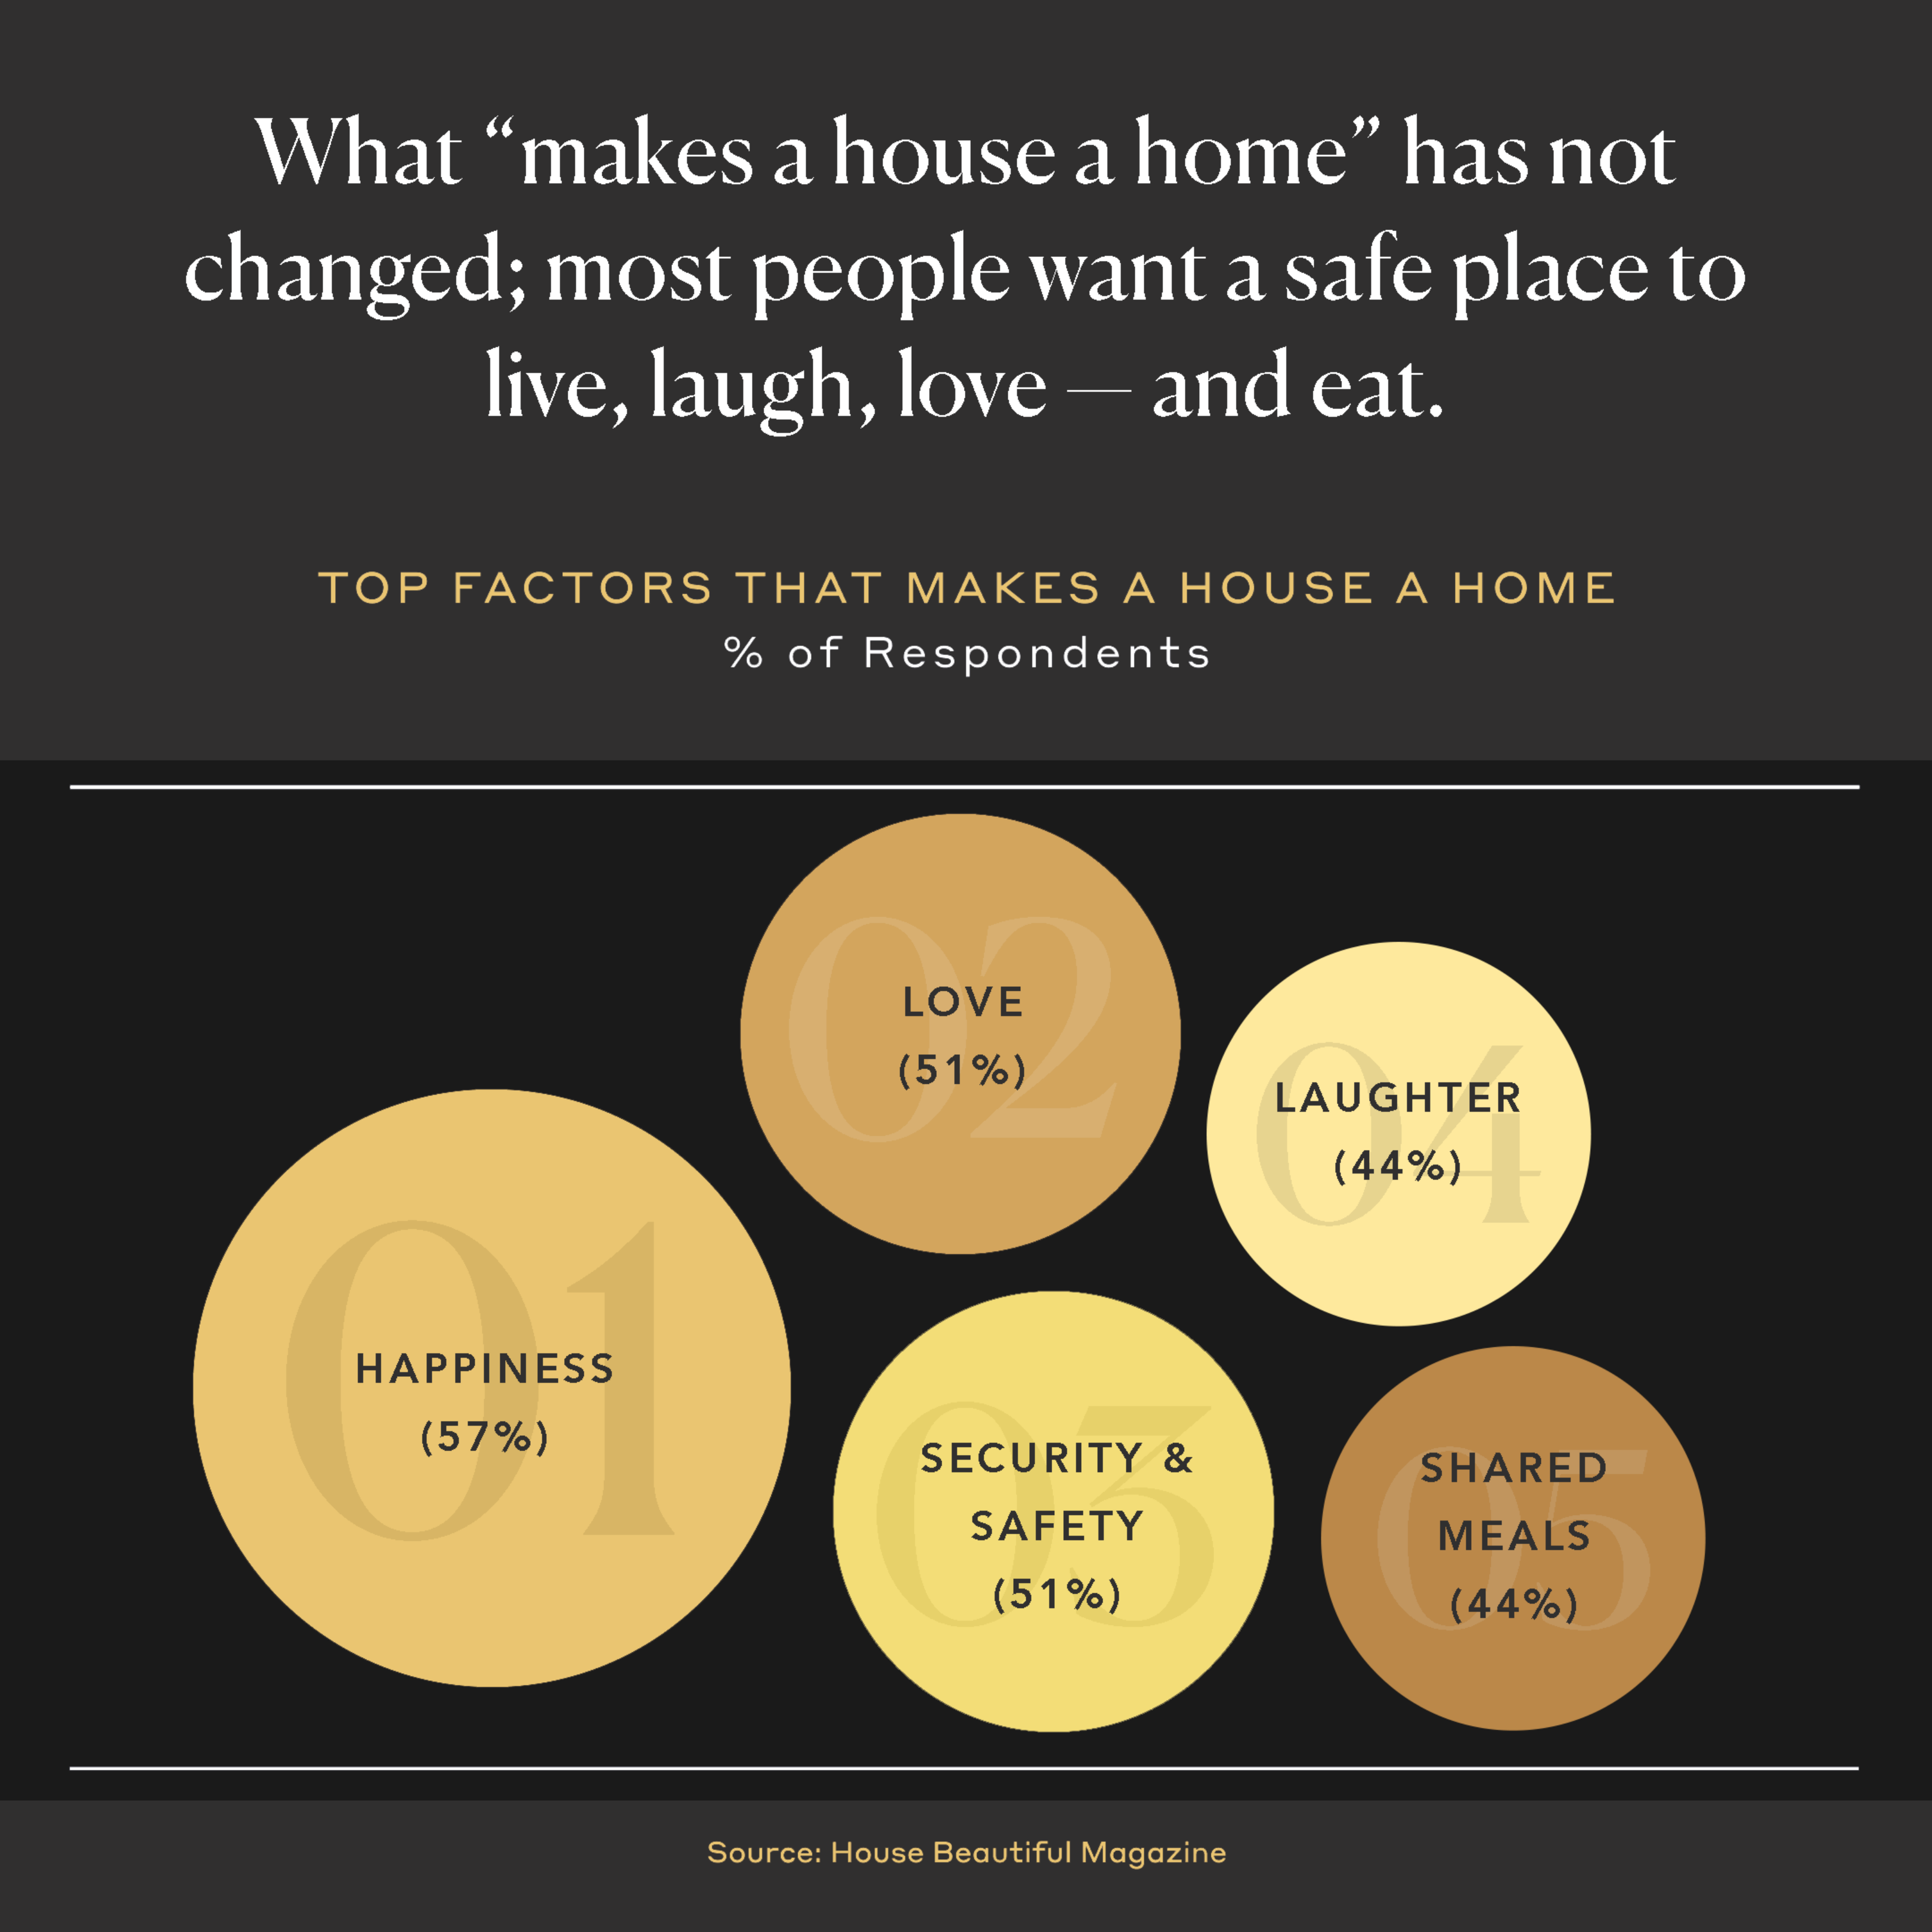 What "makes a house a home" has not changed; most people want a safe place to live, laugh, love - and eat.